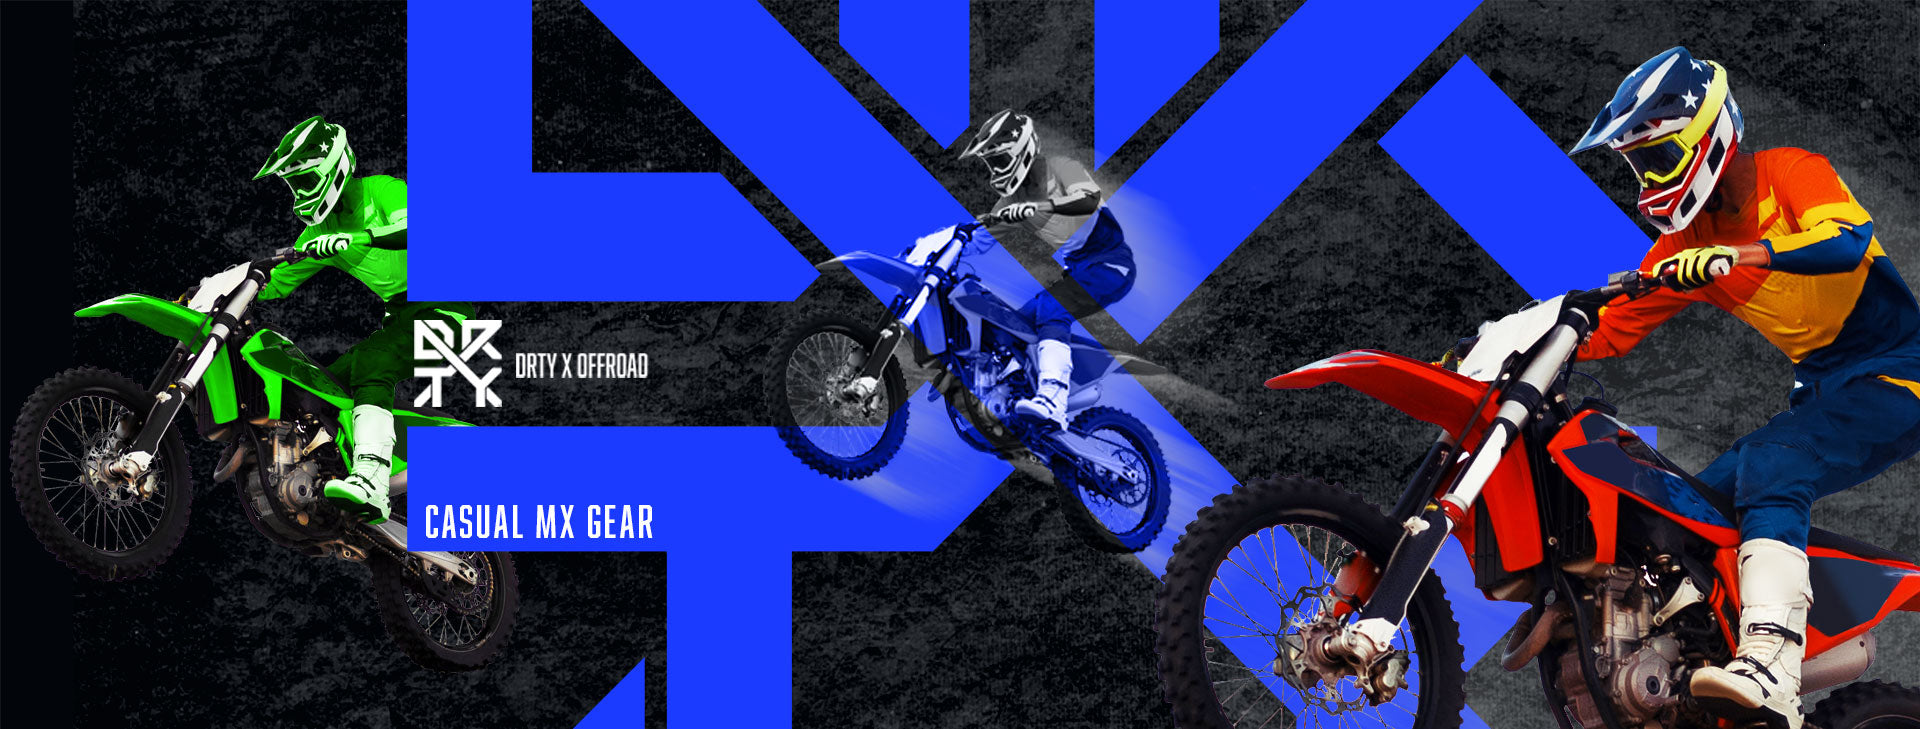 DRTY X Offroad Clothing banner with dirt bikes jumping in the air behind and in front of the logo. 